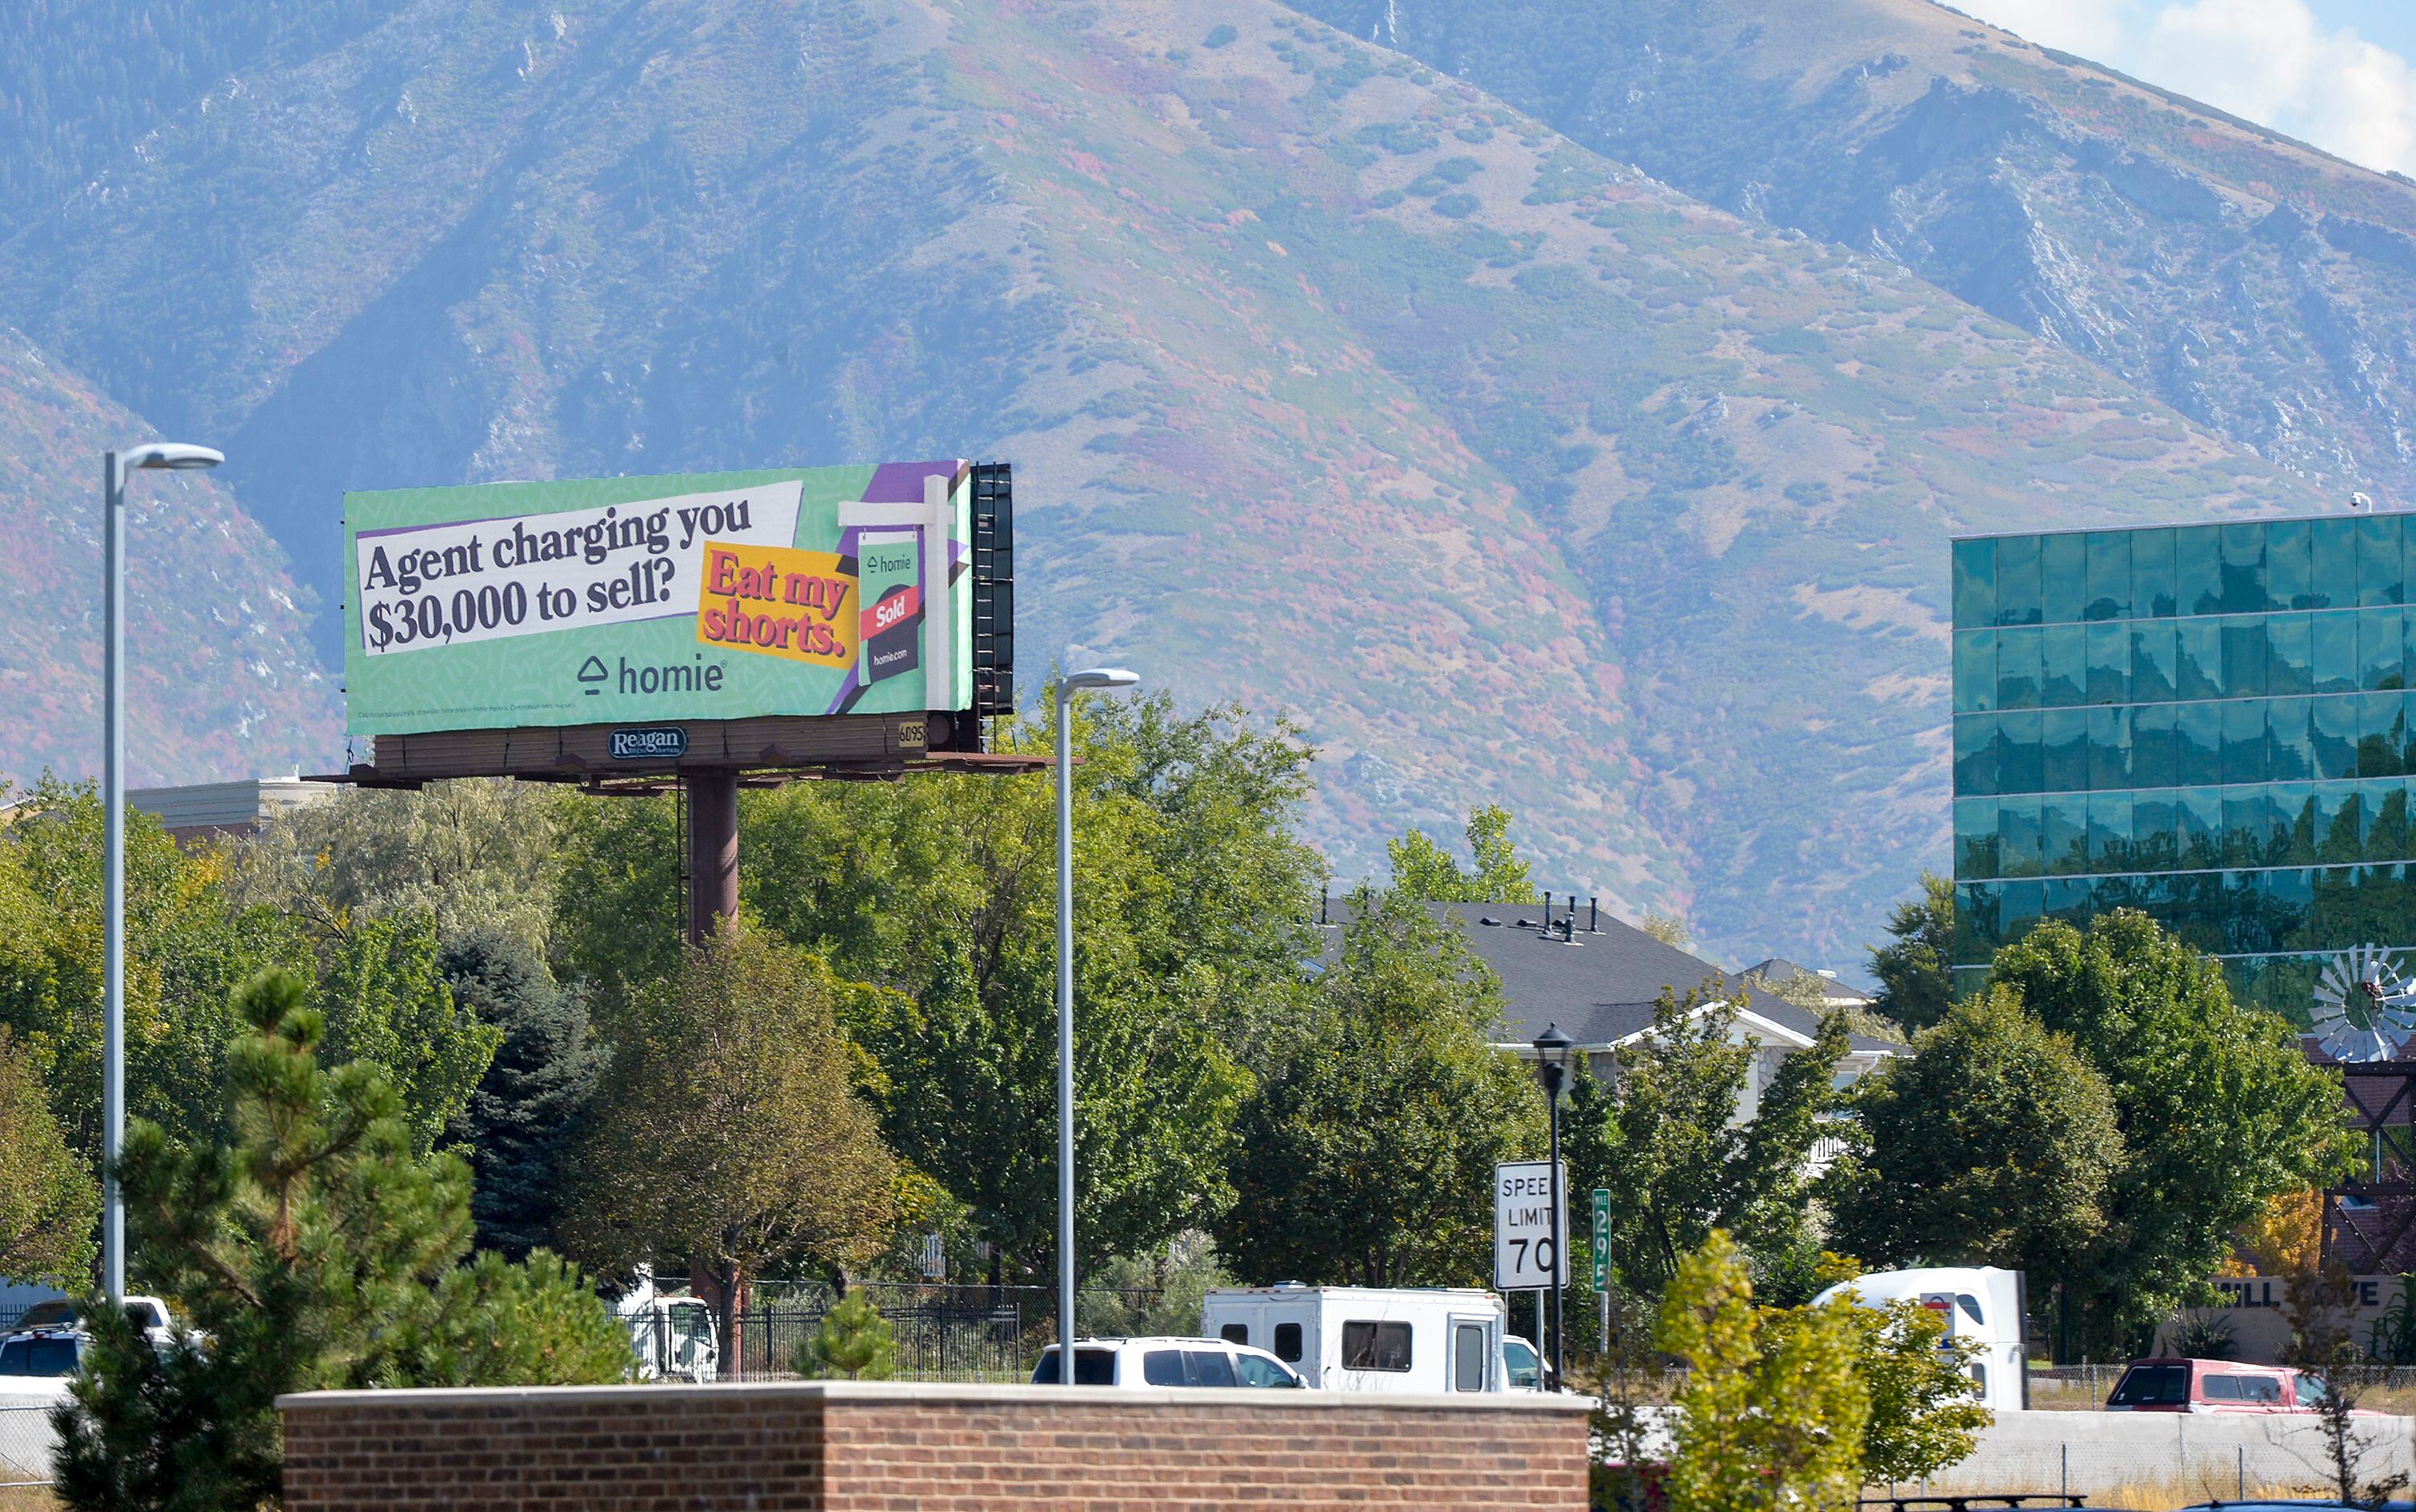 (Chris Samuels | The Salt Lake Tribune) A billboard for the Utah-based home buying company Homie along Interstate 15 in Sandy, Monday, Oct. 3, 2022.